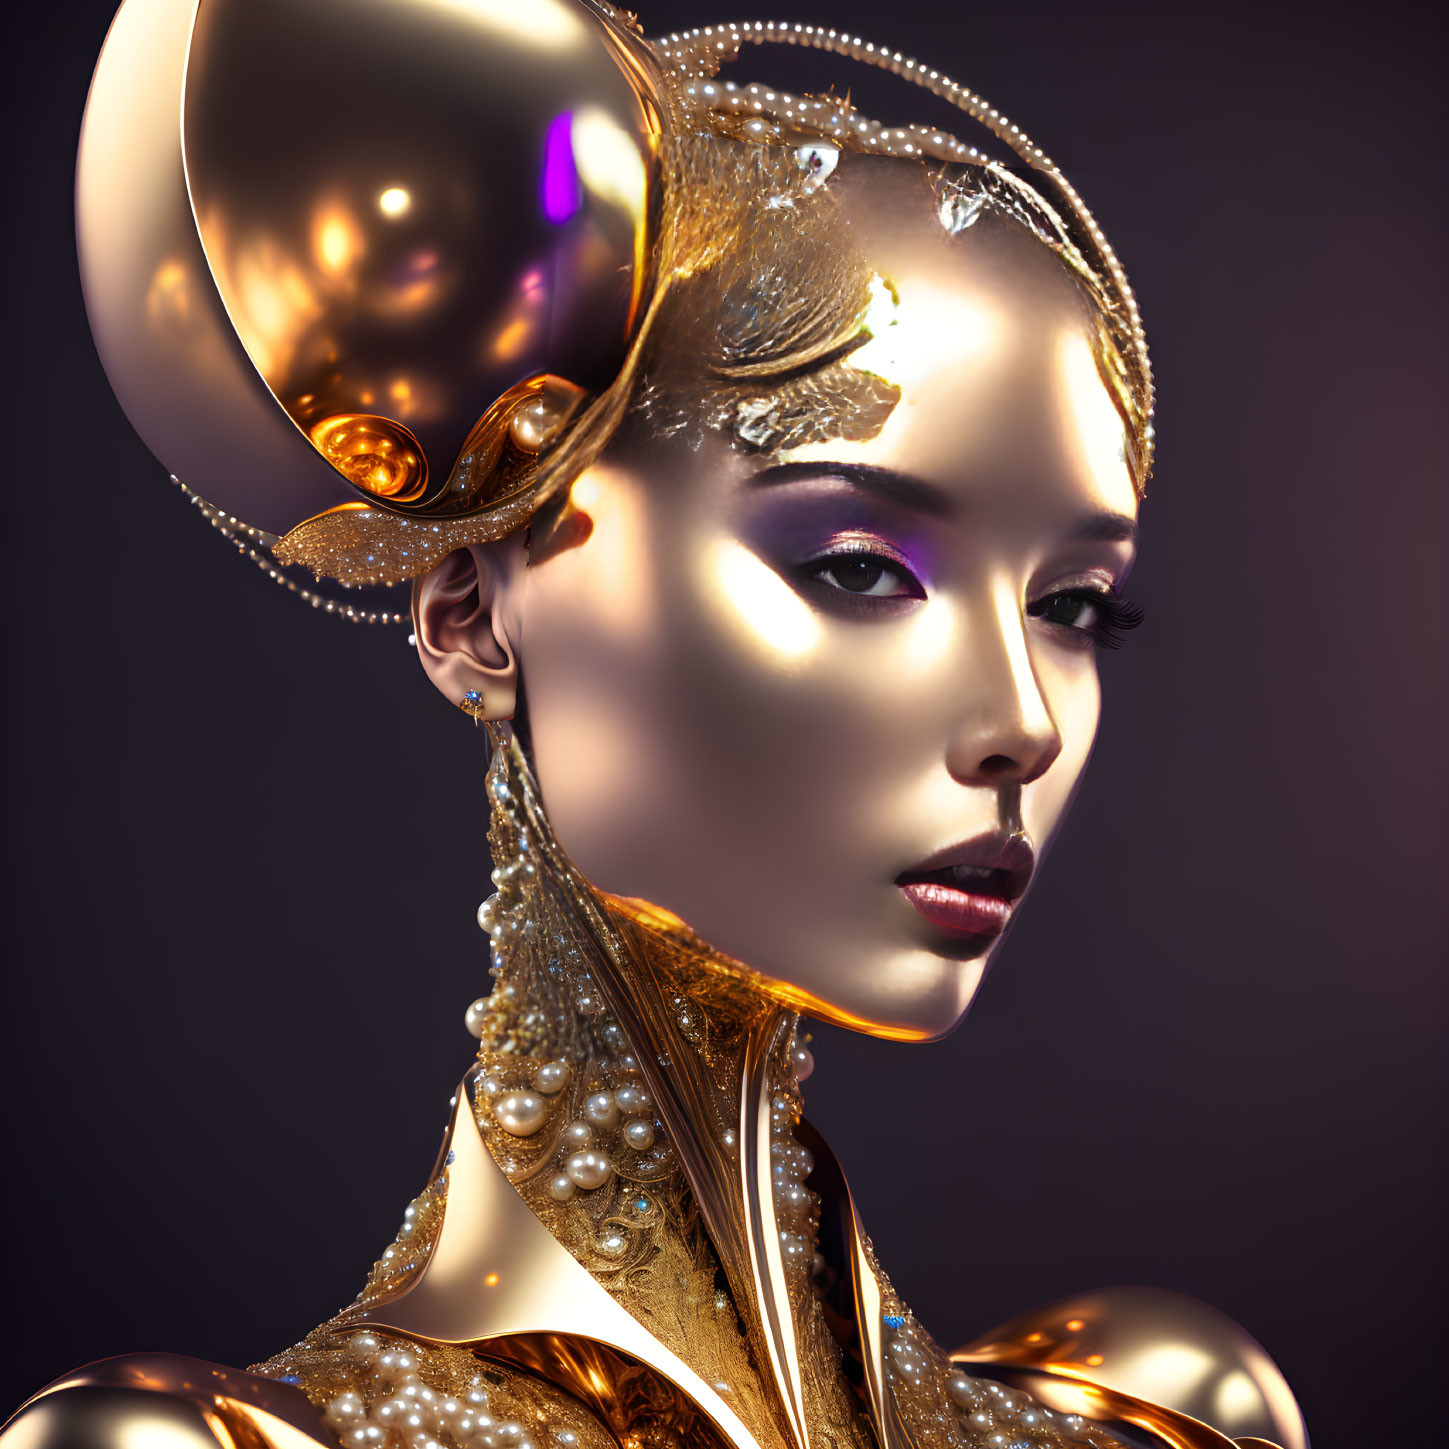 Woman with Golden Makeup and Ornate Headdress: Elegant and Futuristic Portrait